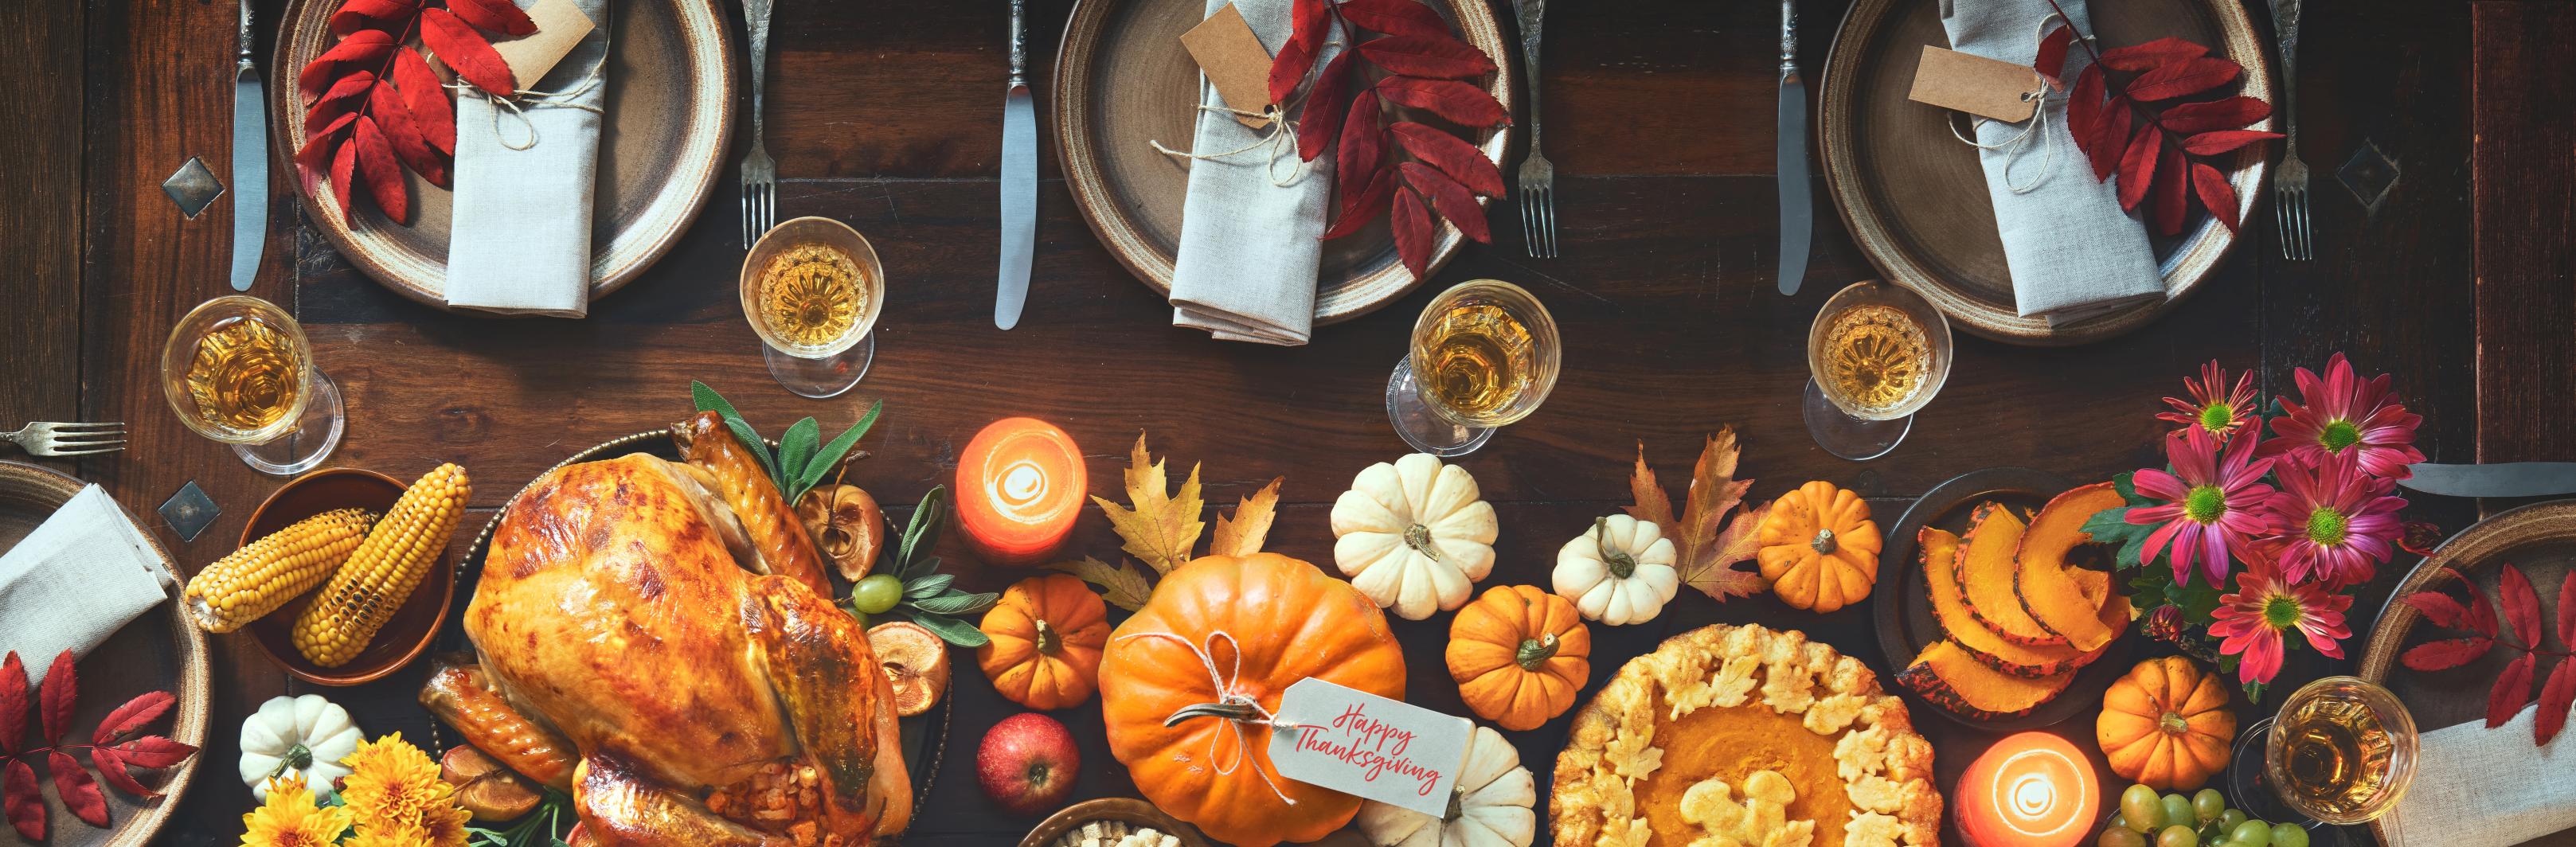 Table with food and paper decorations